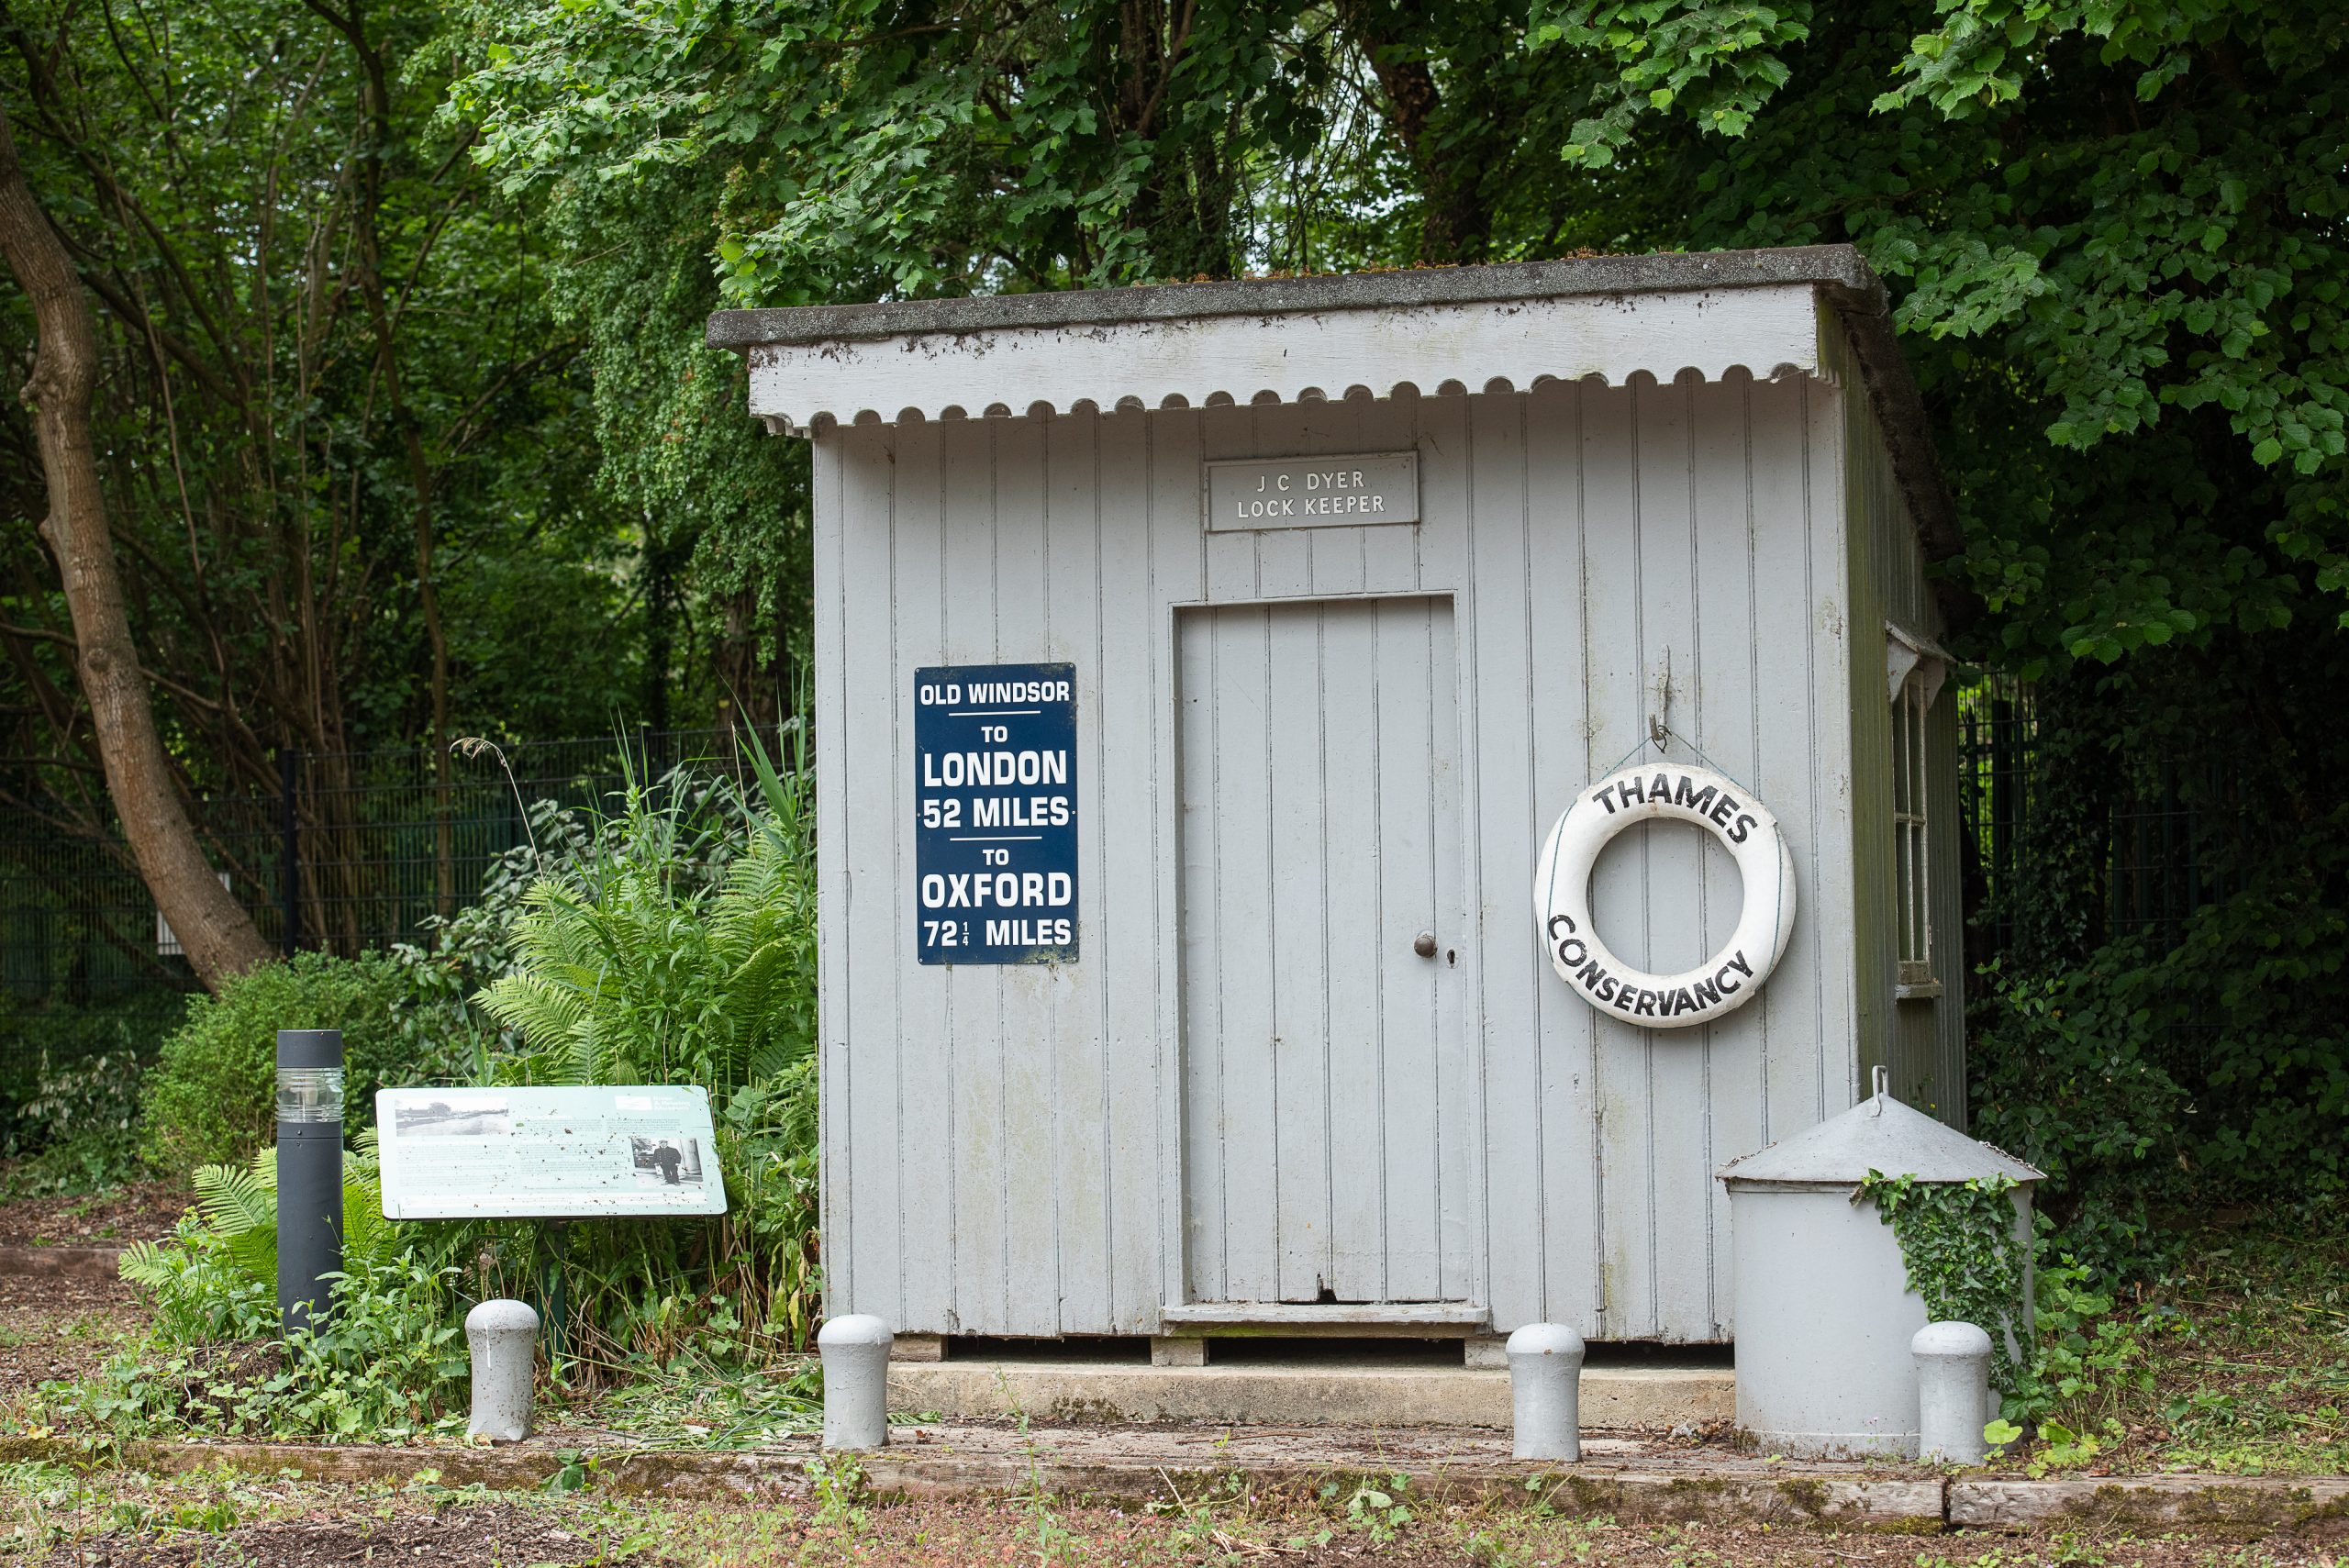 A greay lock keeper's shed with a buoy hanging next to the door